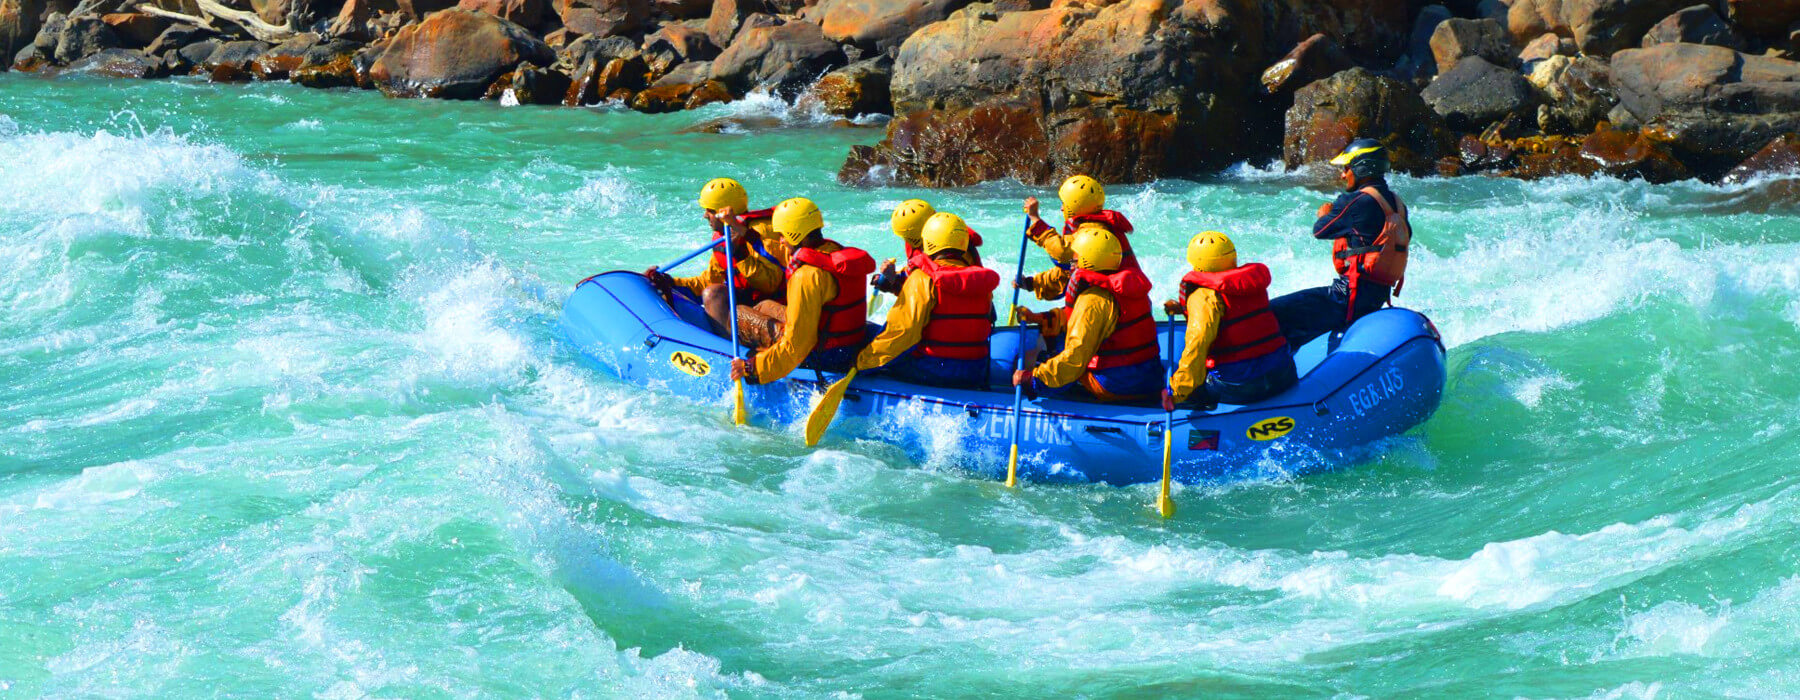 200+ Adventure Tour Packages @ Budget Price